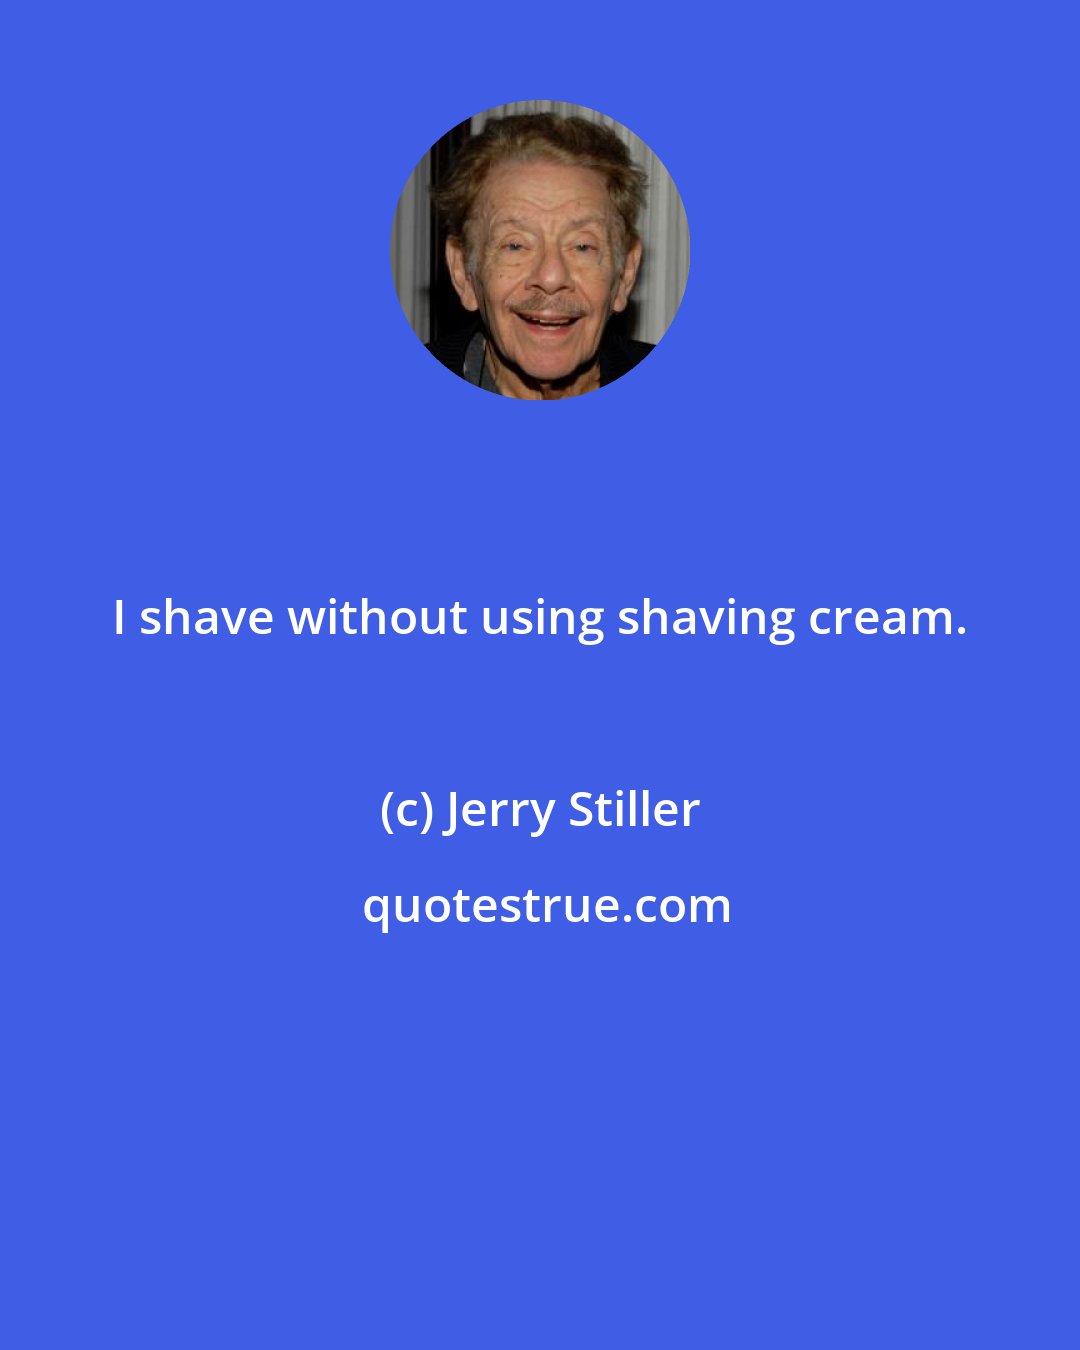 Jerry Stiller: I shave without using shaving cream.